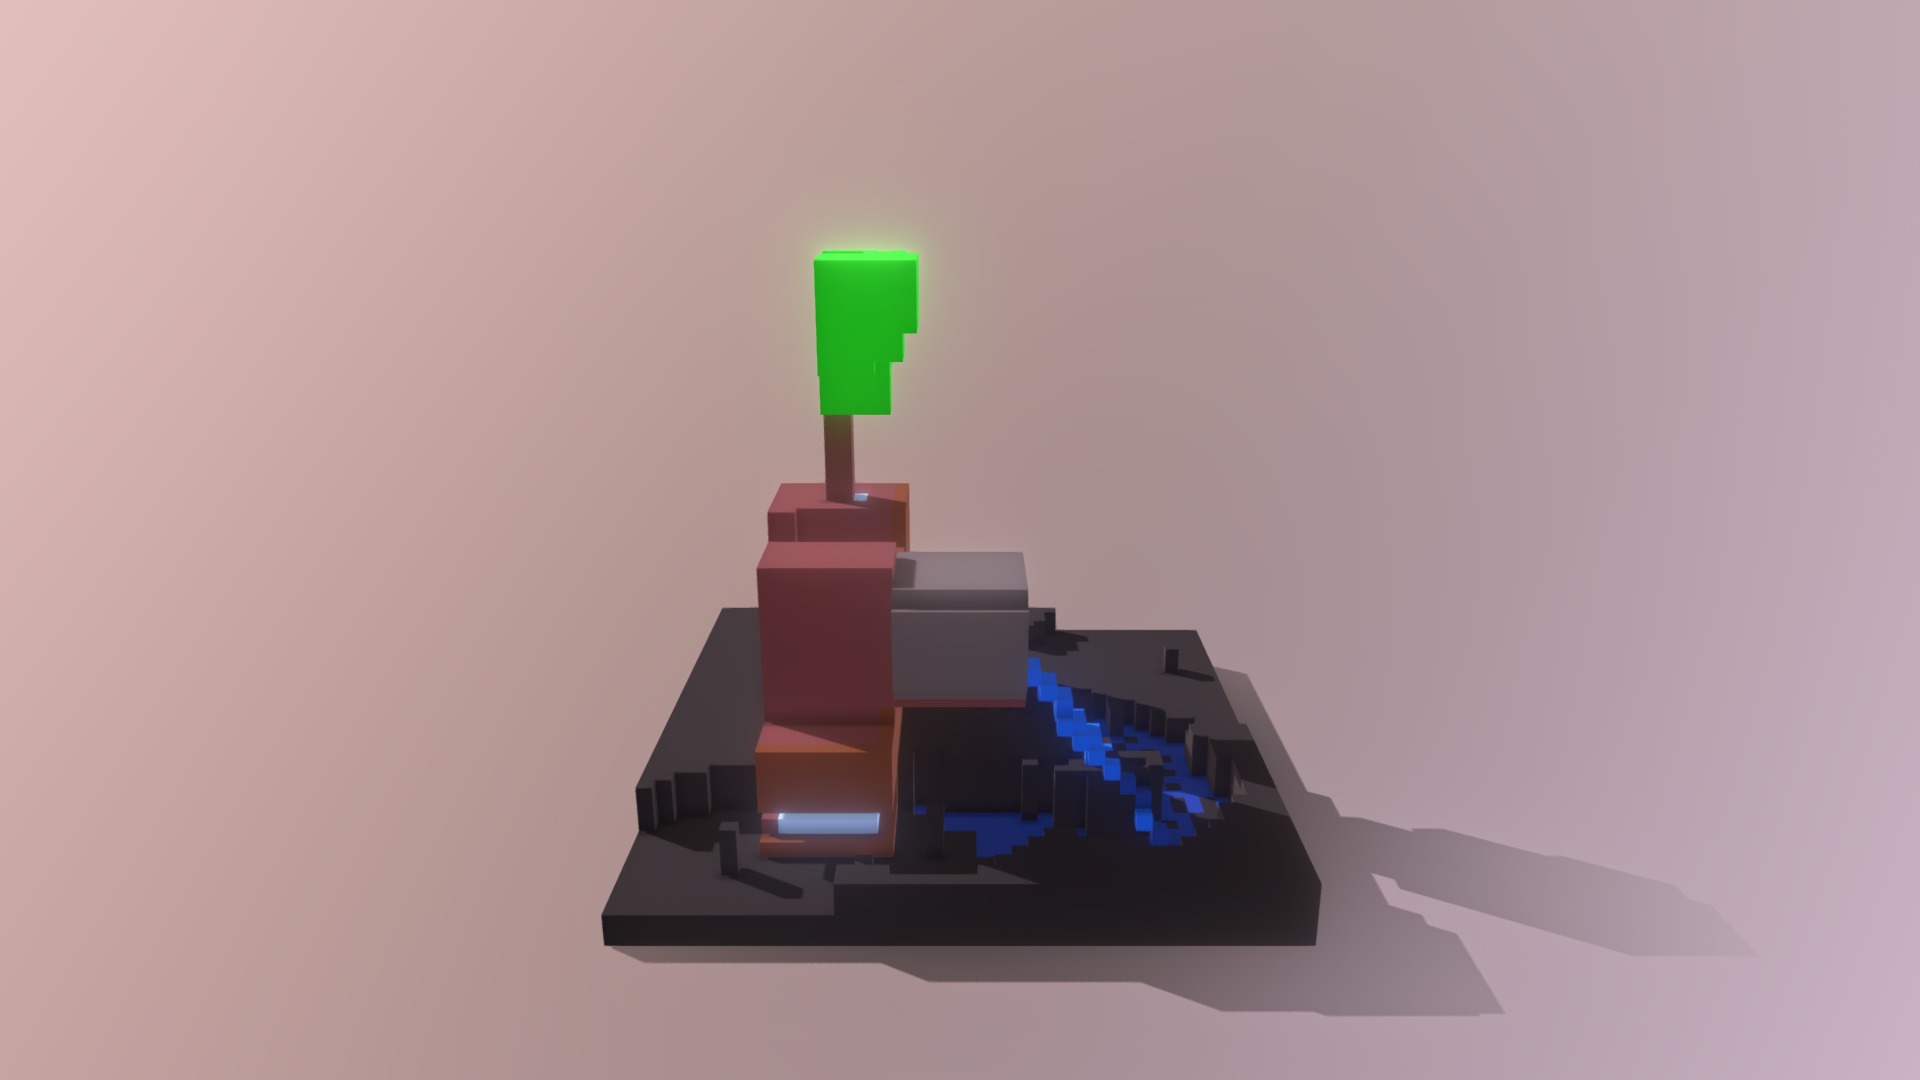 3D model Magical Water Voxels - This is a 3D model of the Magical Water Voxels. The 3D model is about a toy figure with a green light.